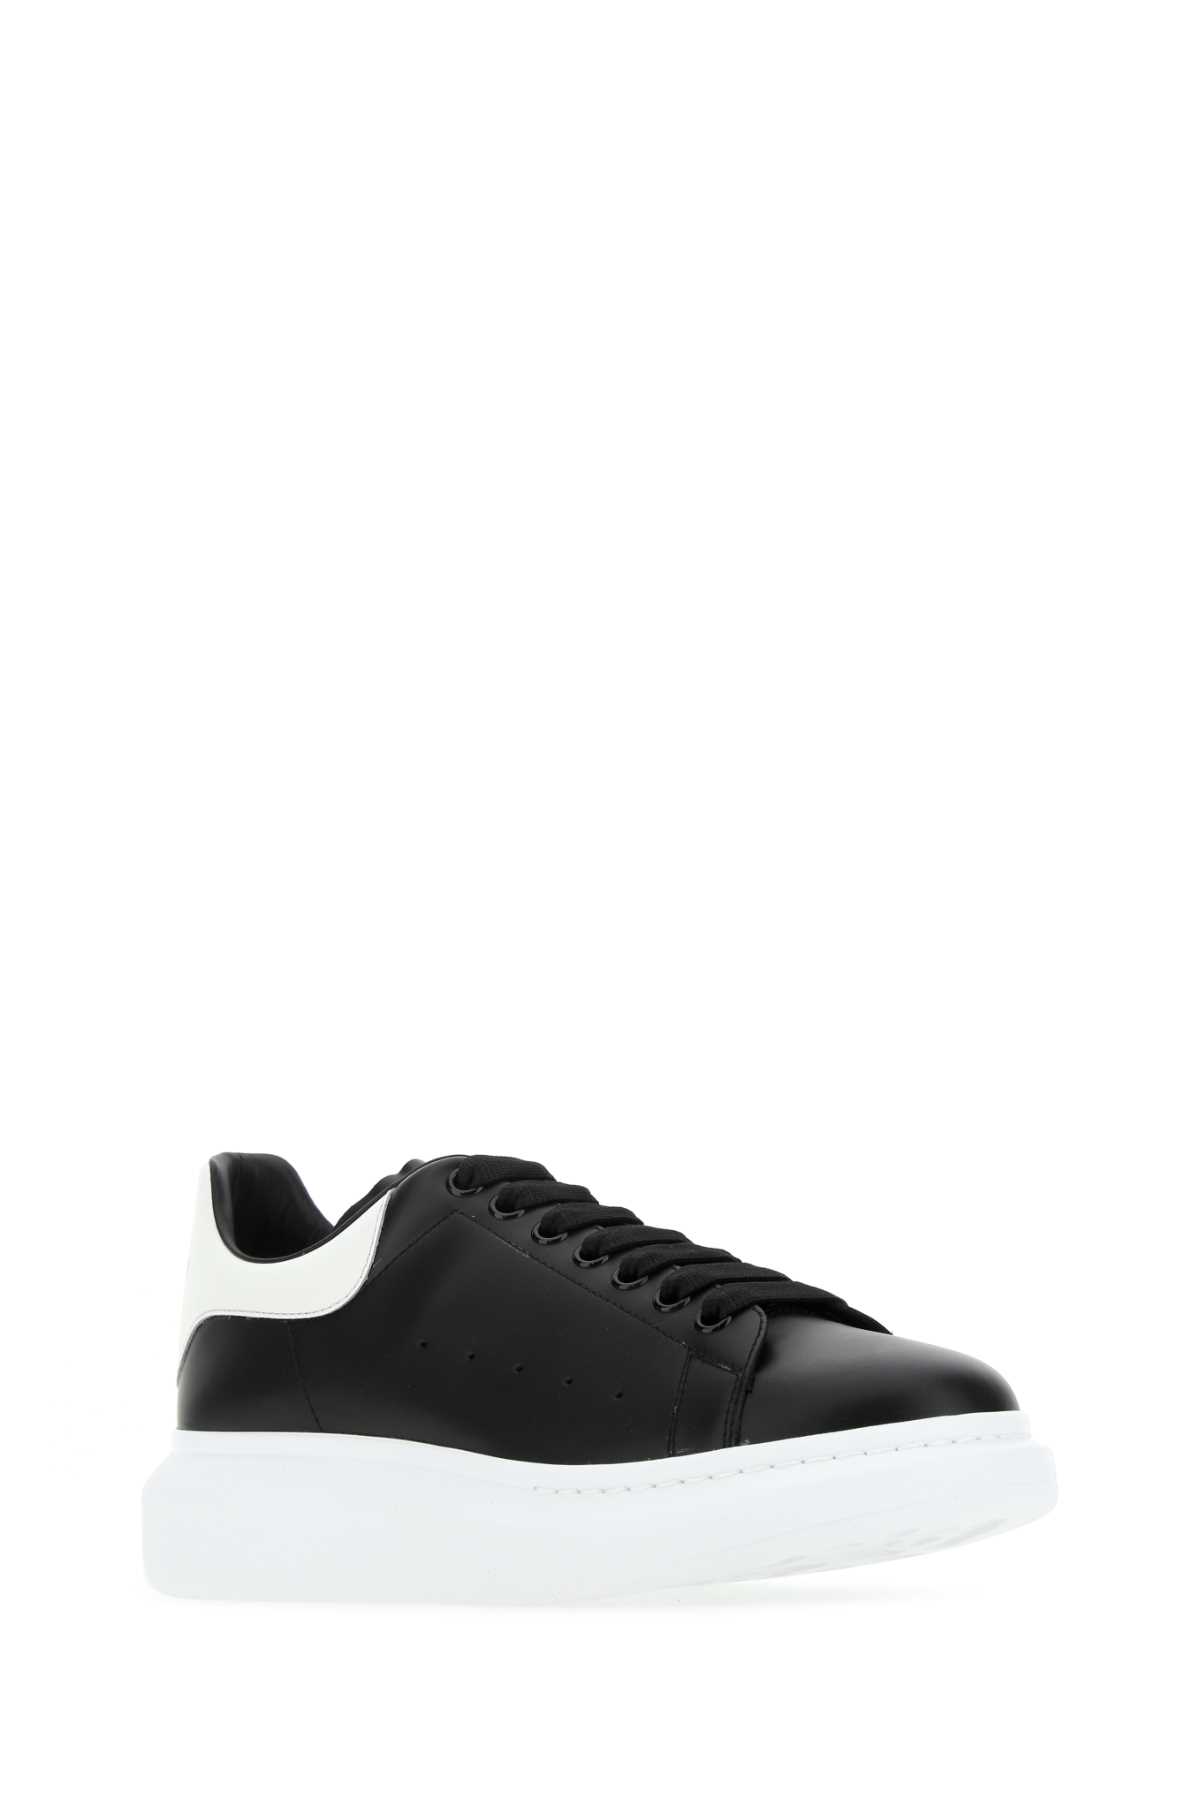 Shop Alexander Mcqueen Black Leather Sneakers With White Leather Heel In 1070